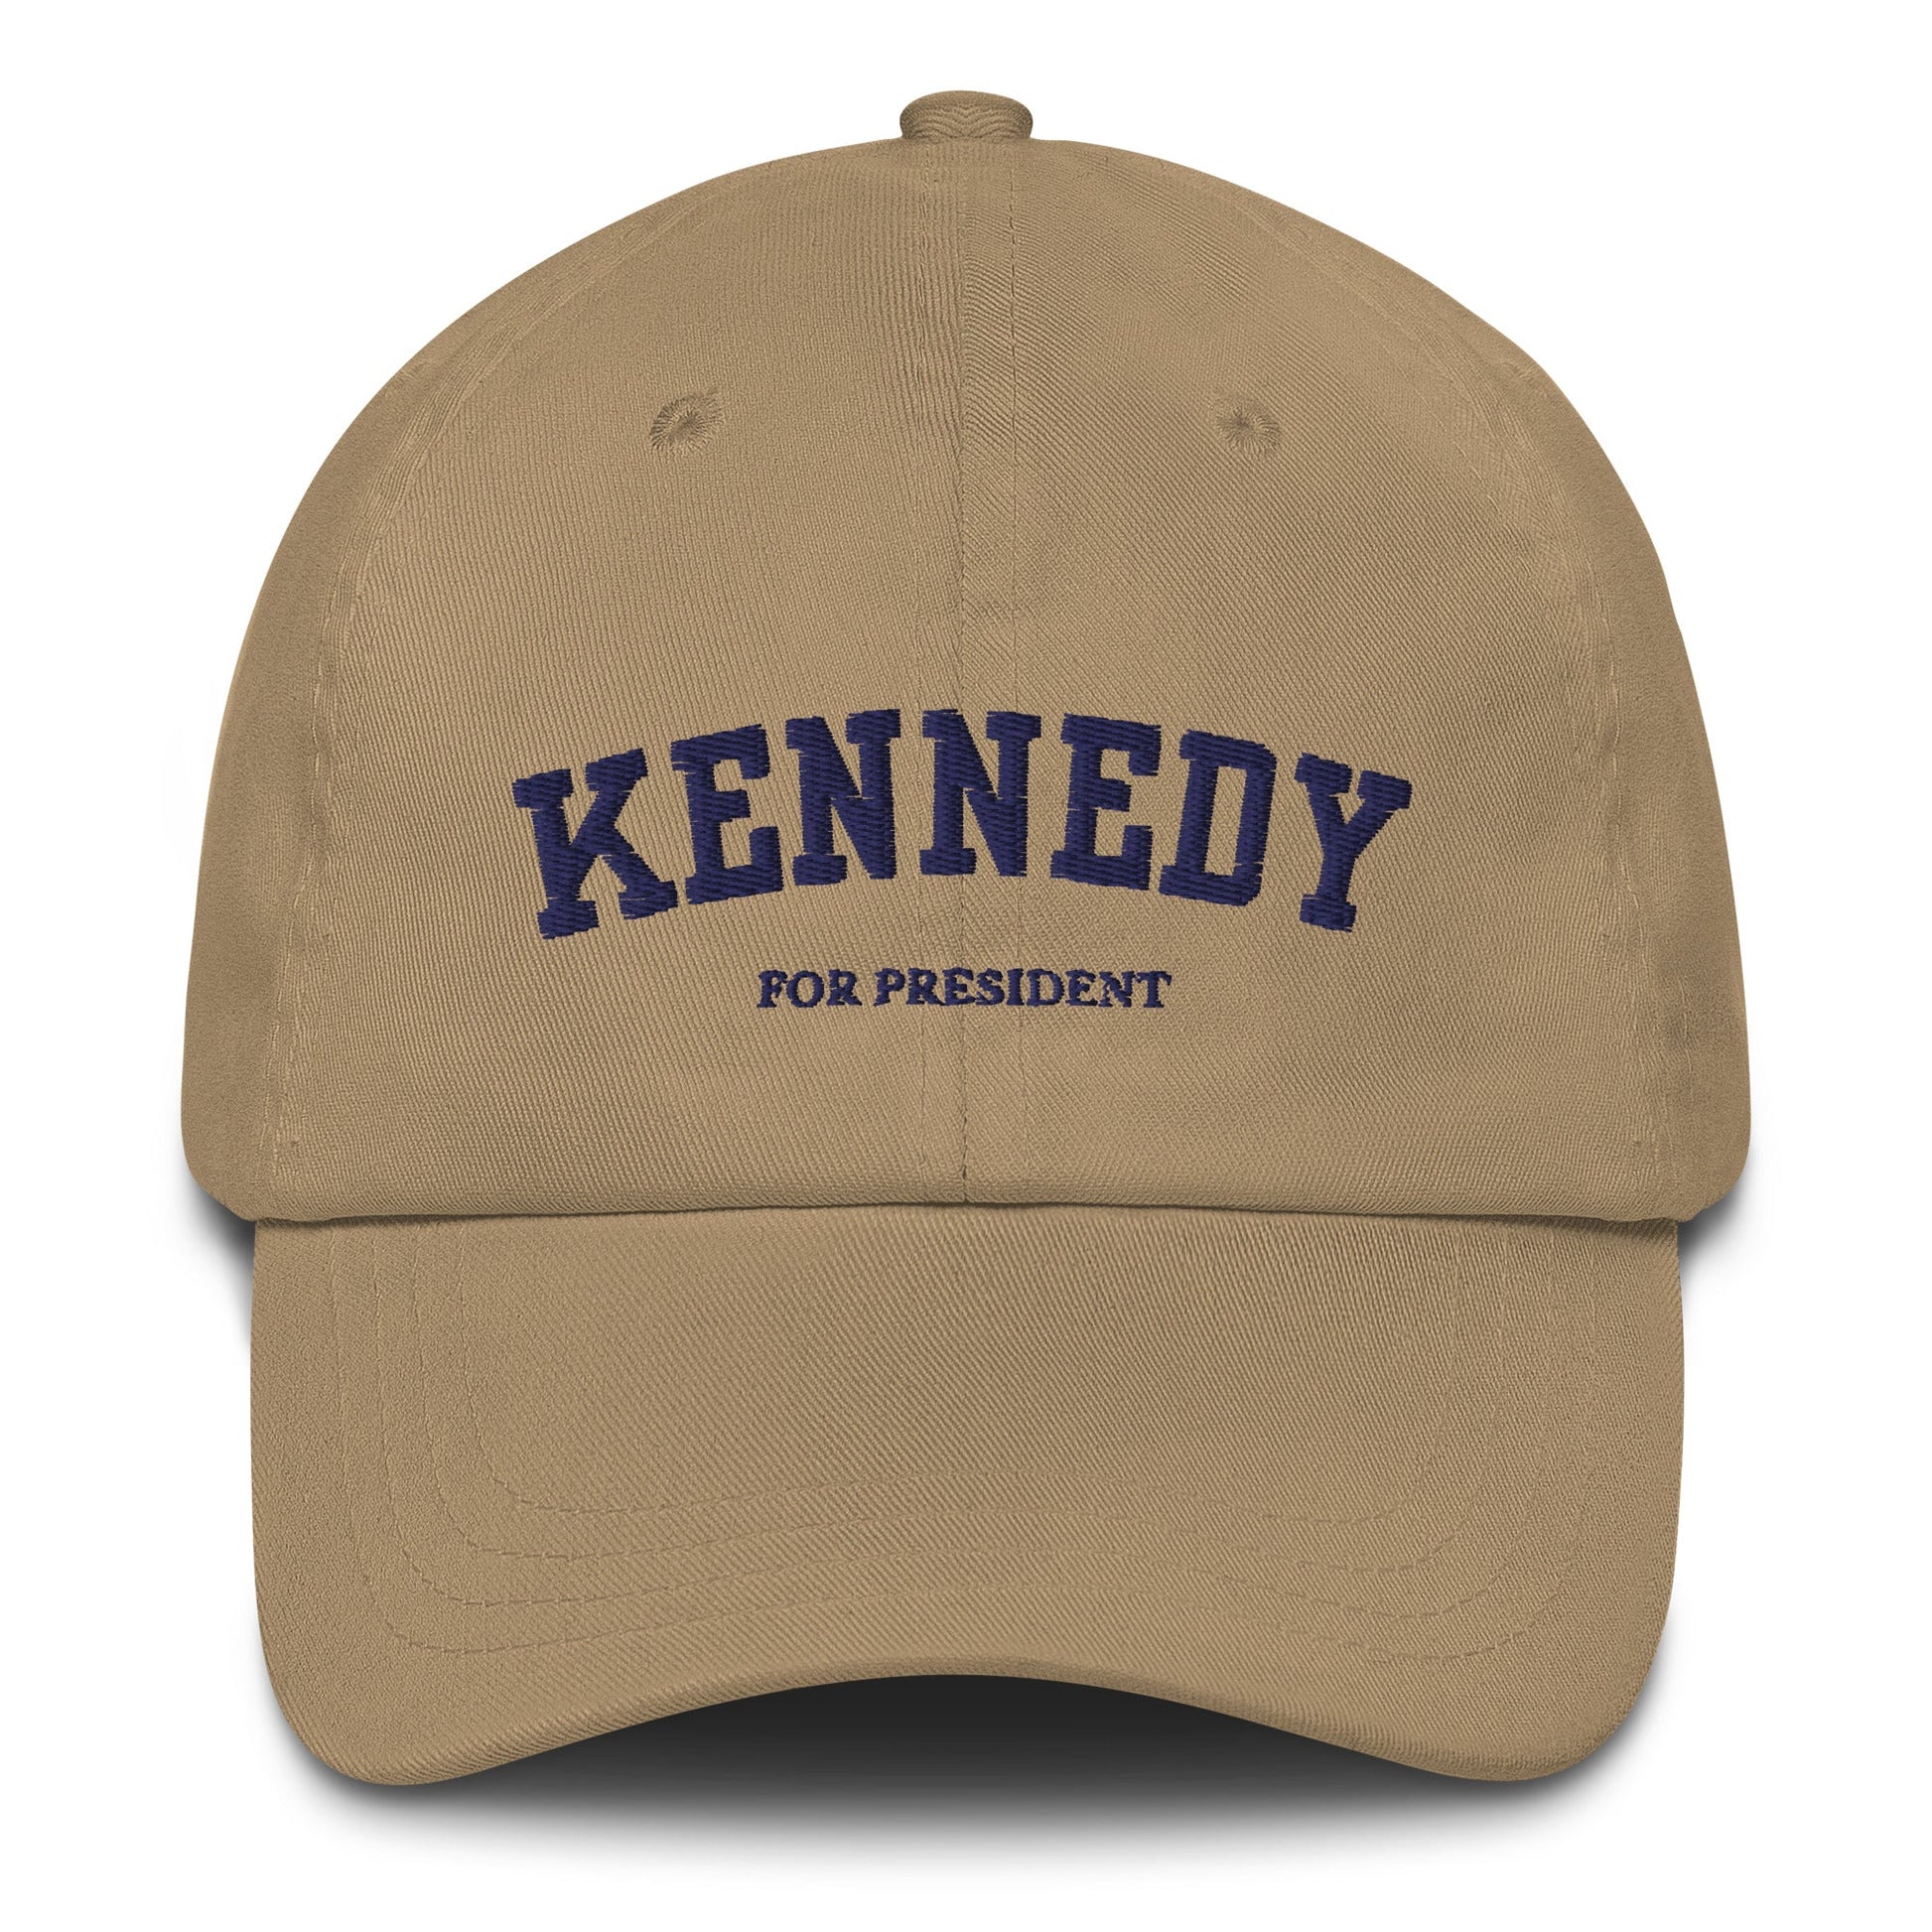 Kennedy For President Collegiate Embroidered Dad Hat - TEAM KENNEDY. All rights reserved